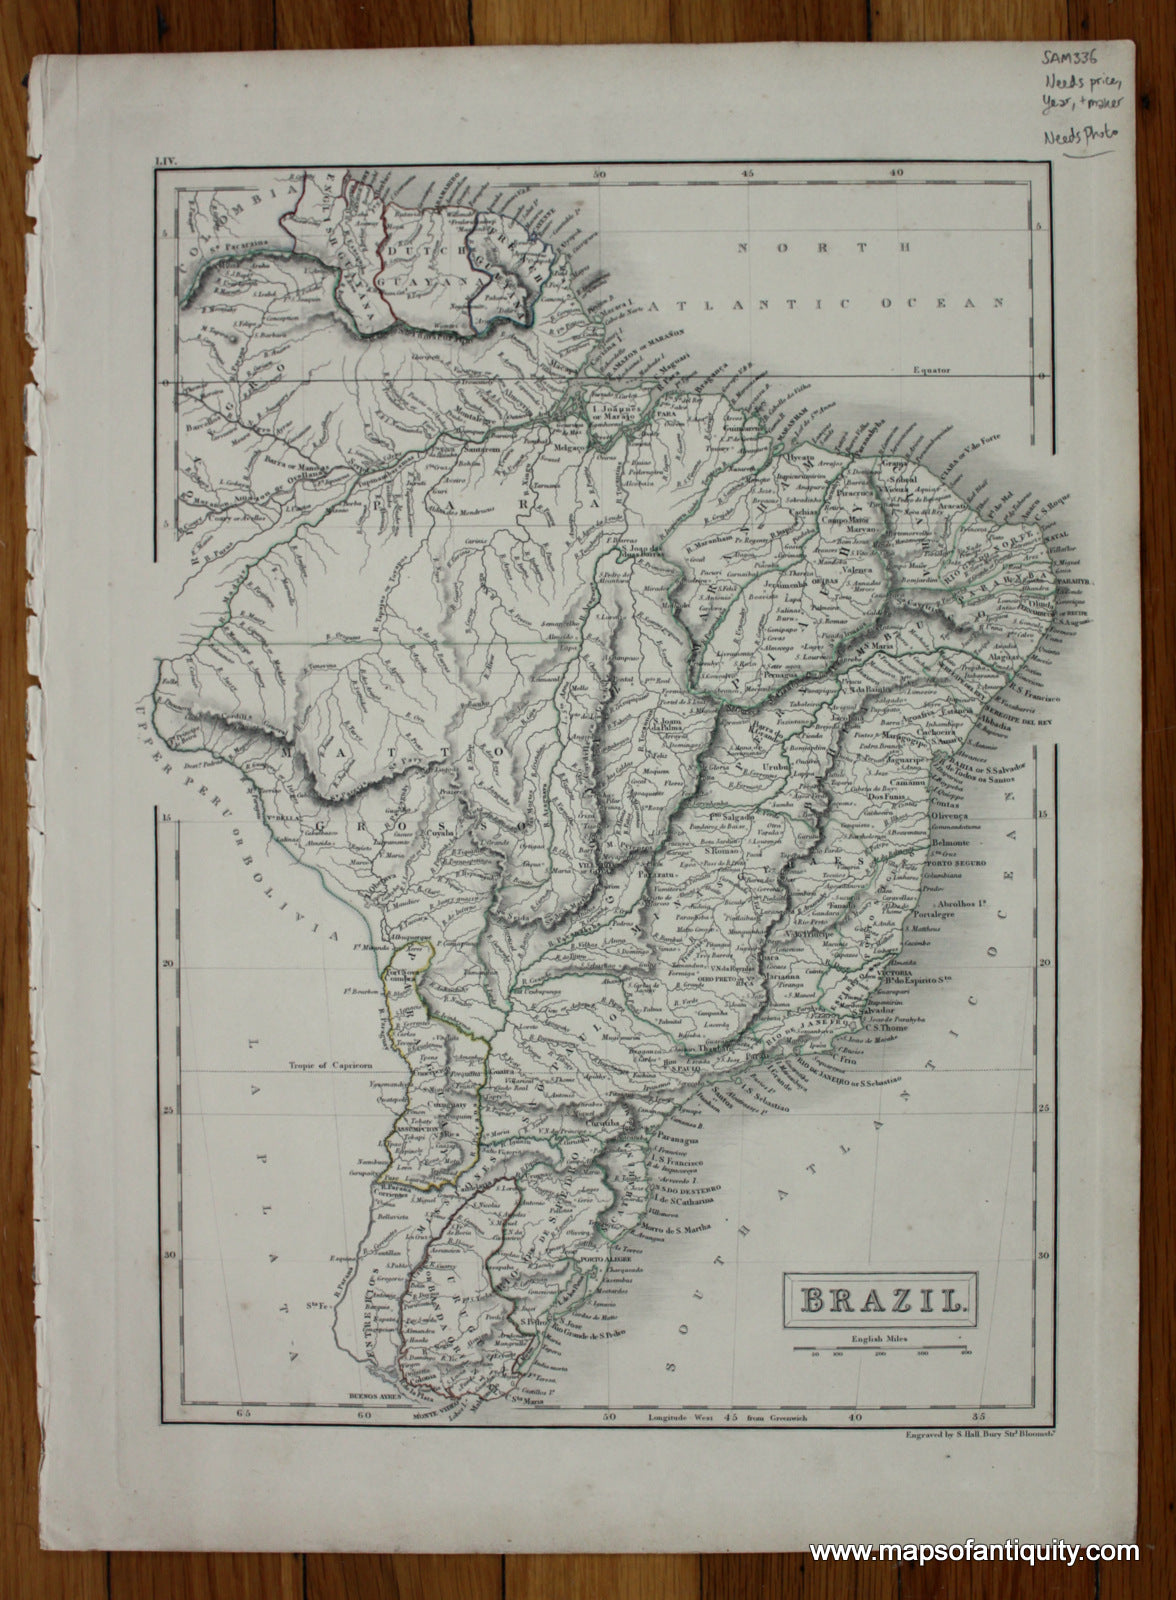 Antique-Hand-Colored-Map-Brazil-South-America--c.-1844-Black-Maps-Of-Antiquity